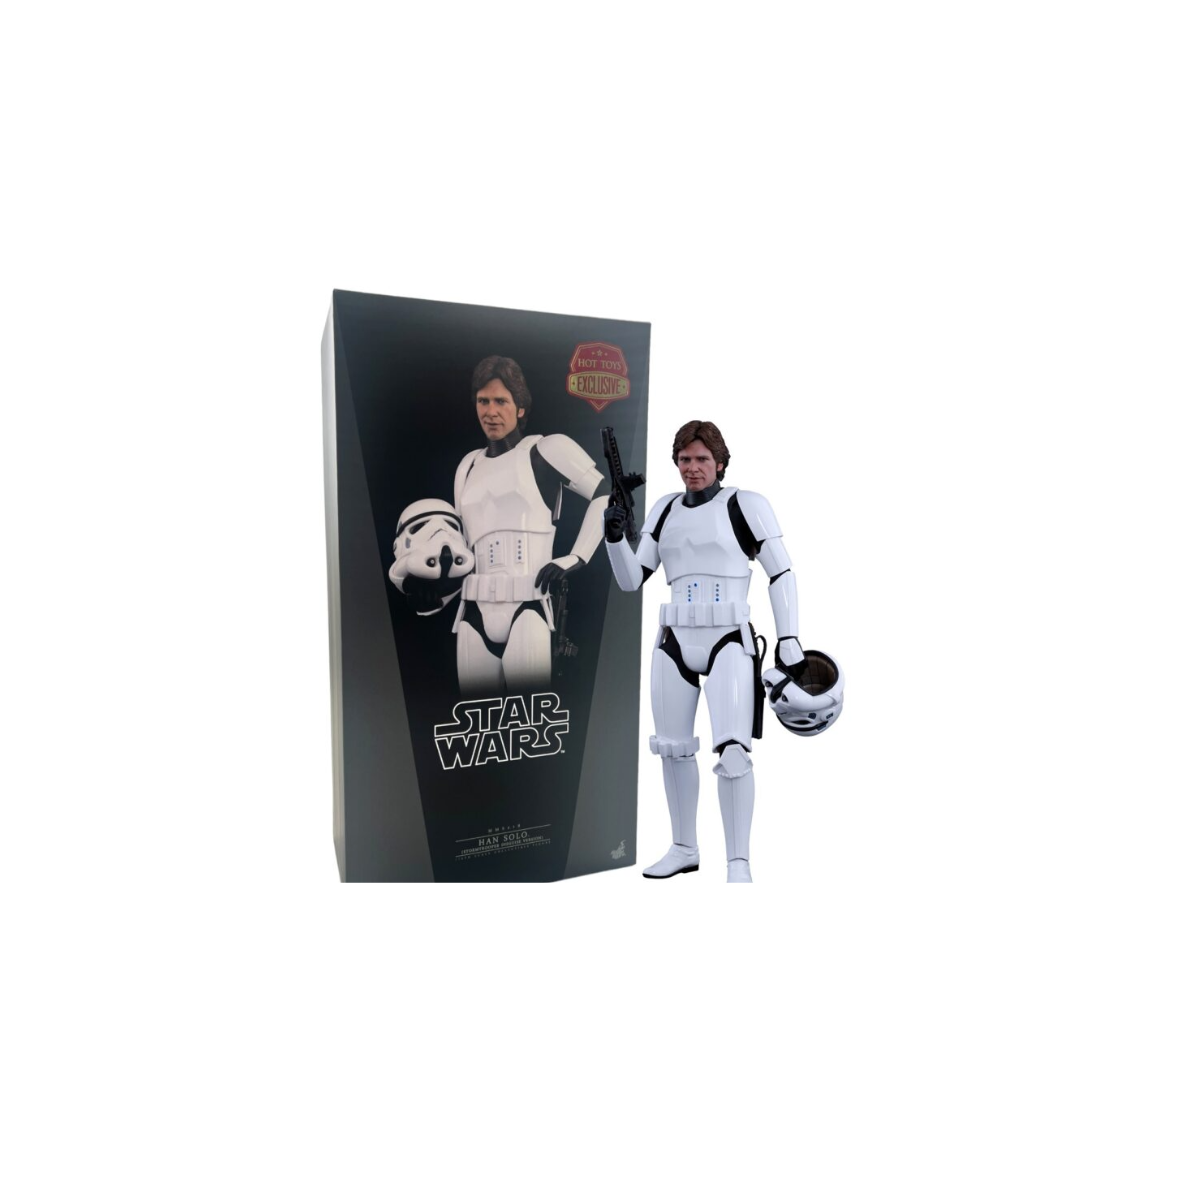 Star Wars Episode IV A New Hope Han Solo Stormtrooper Disguise Version